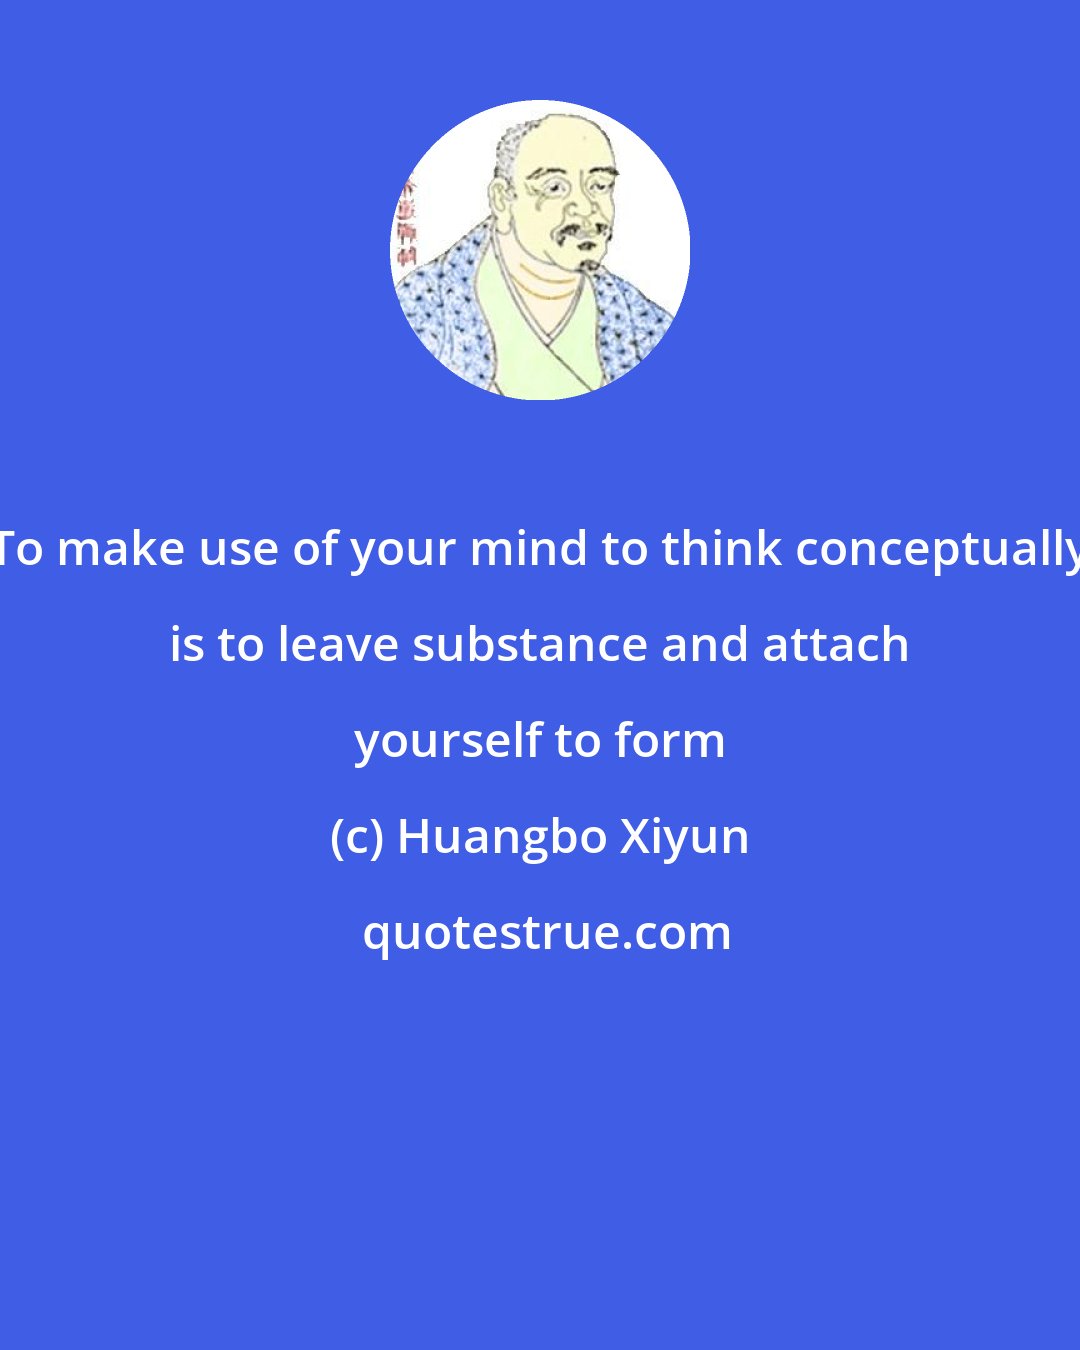 Huangbo Xiyun: To make use of your mind to think conceptually is to leave substance and attach yourself to form